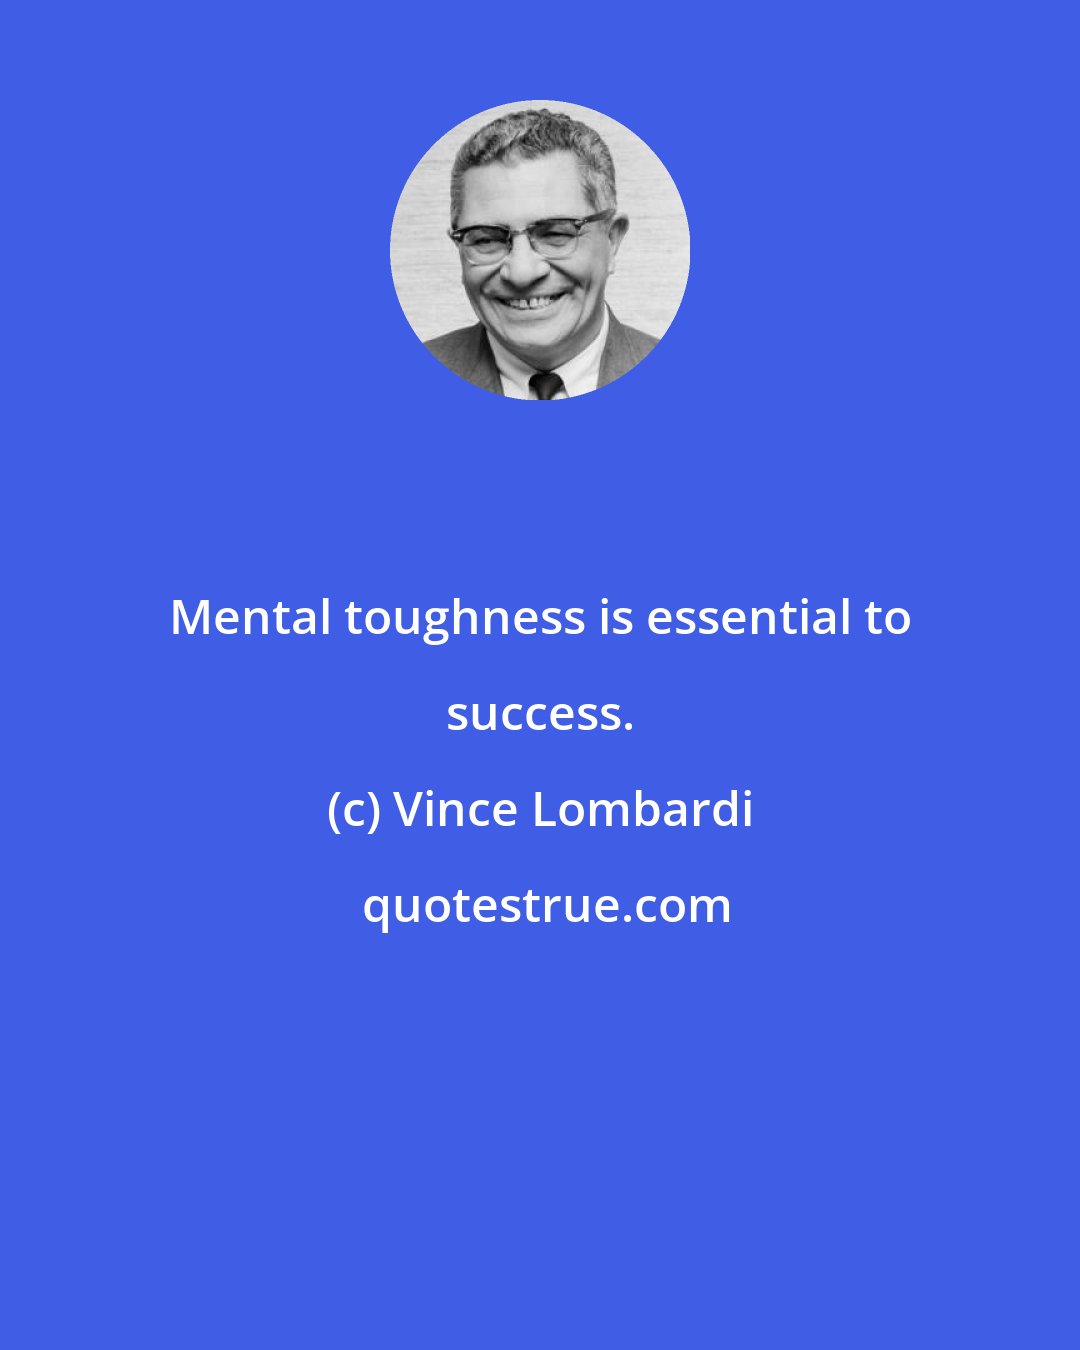 Vince Lombardi: Mental toughness is essential to success.